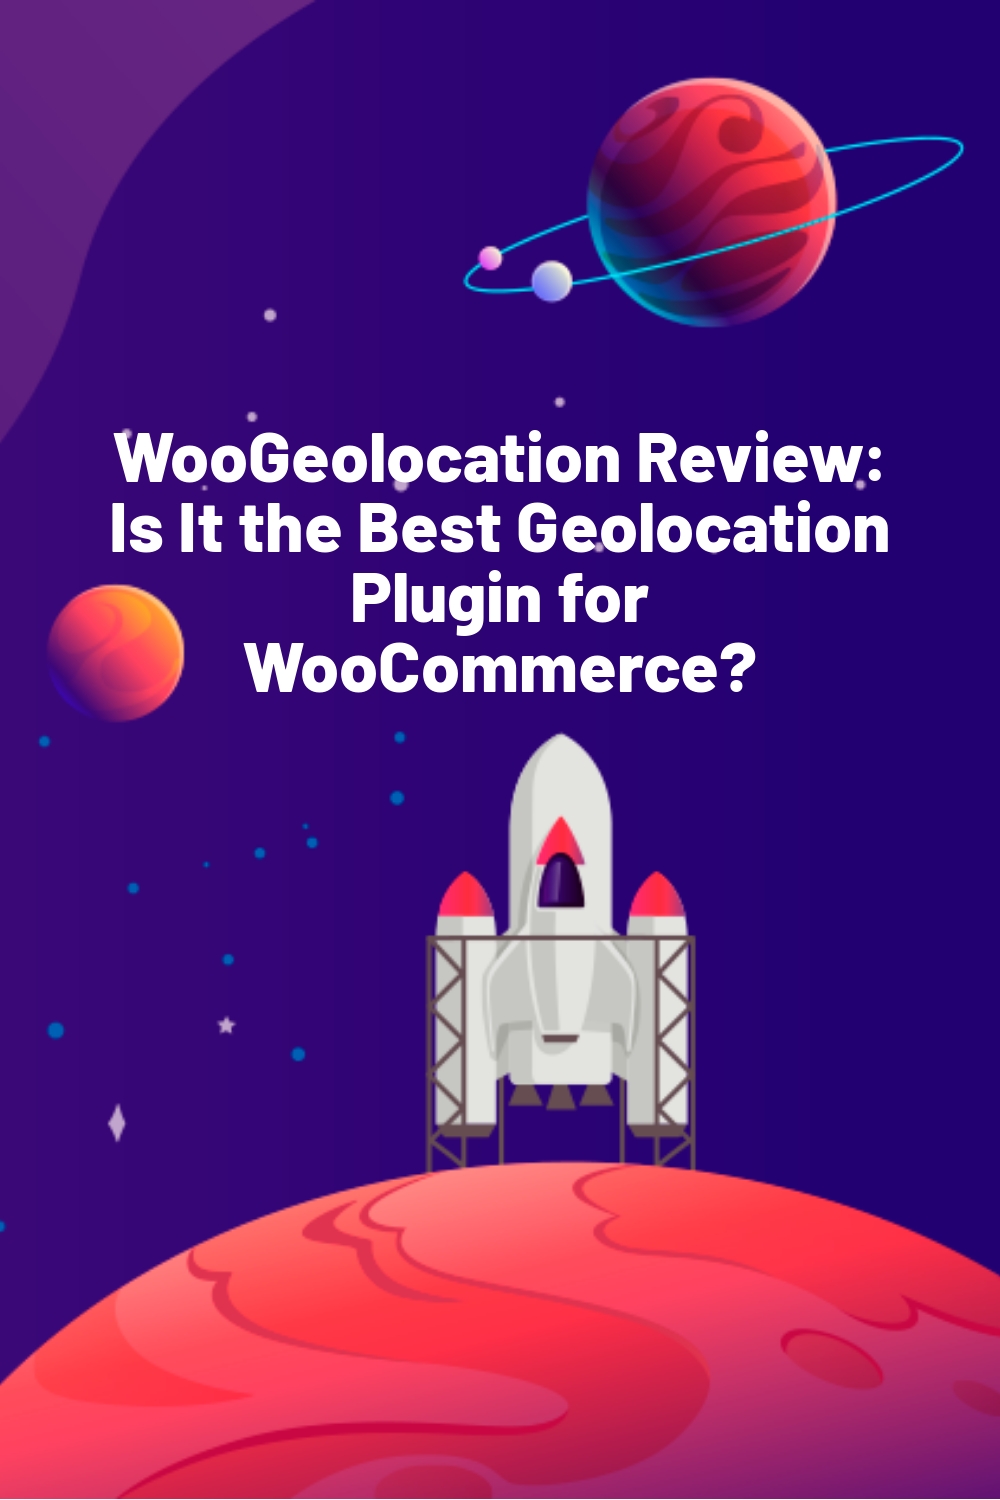 WooGeolocation Review: Is It the Best Geolocation Plugin for WooCommerce?